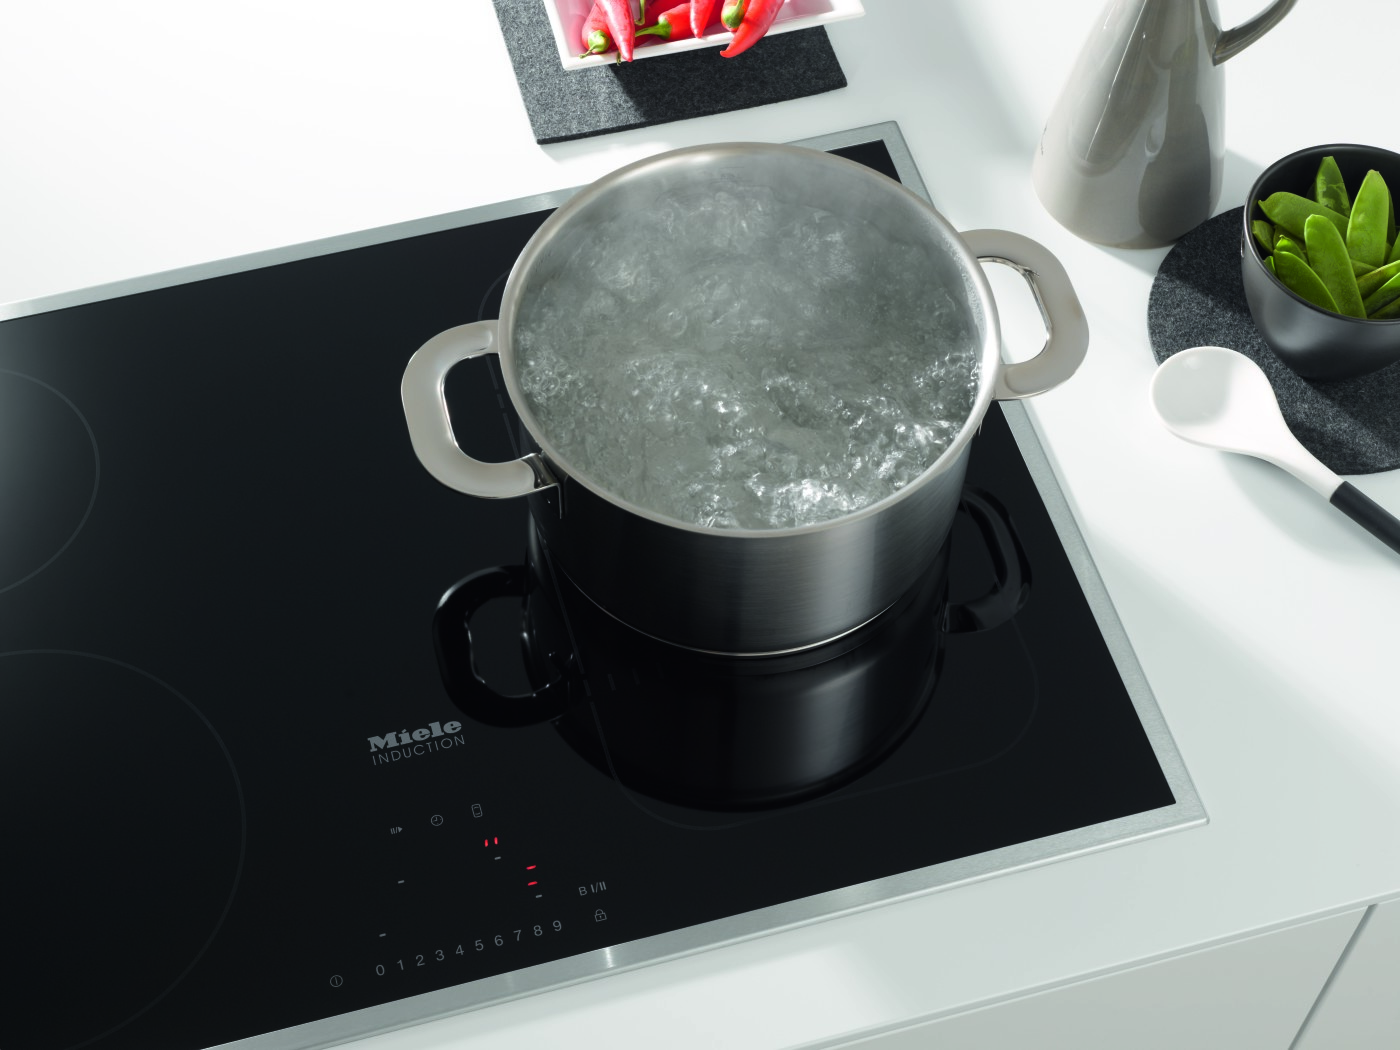 /i/products/Product Category Page/Hobs & Combisets/Induction/Efficient and Safe.jpg